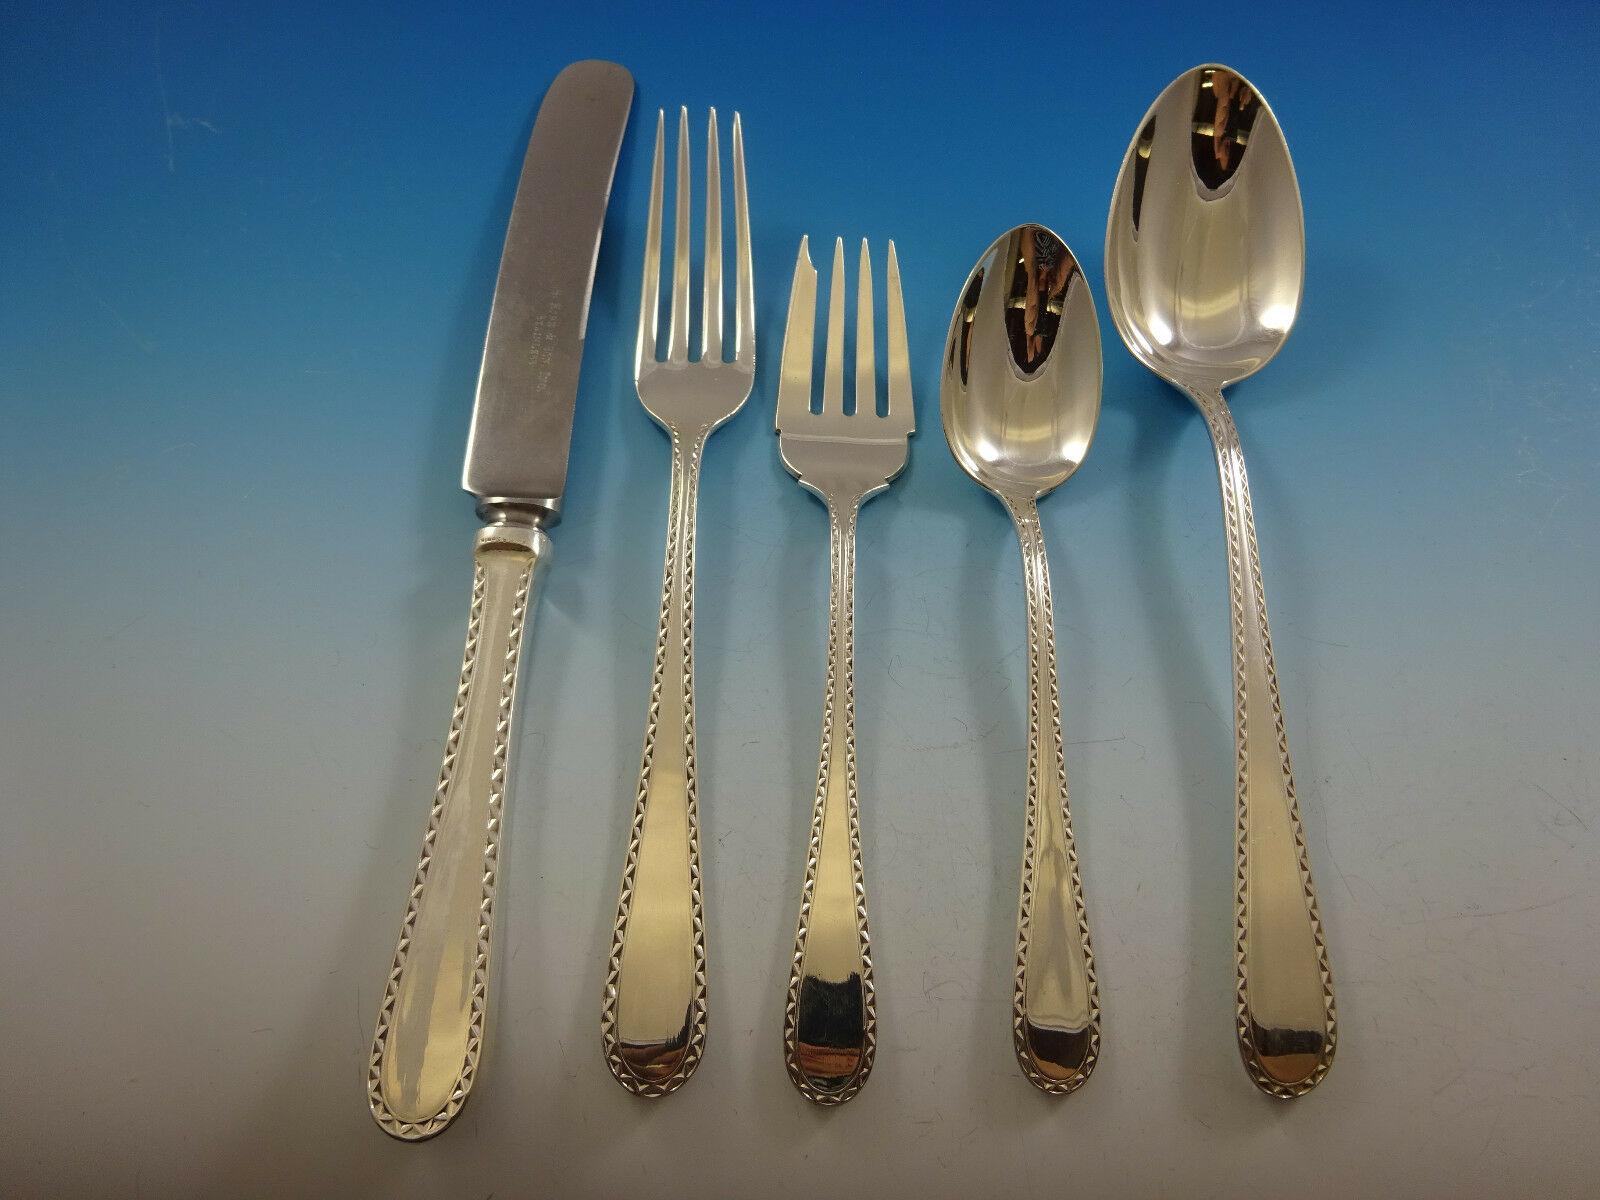 Exceptional Winslow by Kirk huge sterling silver flatware set - 155 pieces. This set includes:

12 knives, 8 3/4